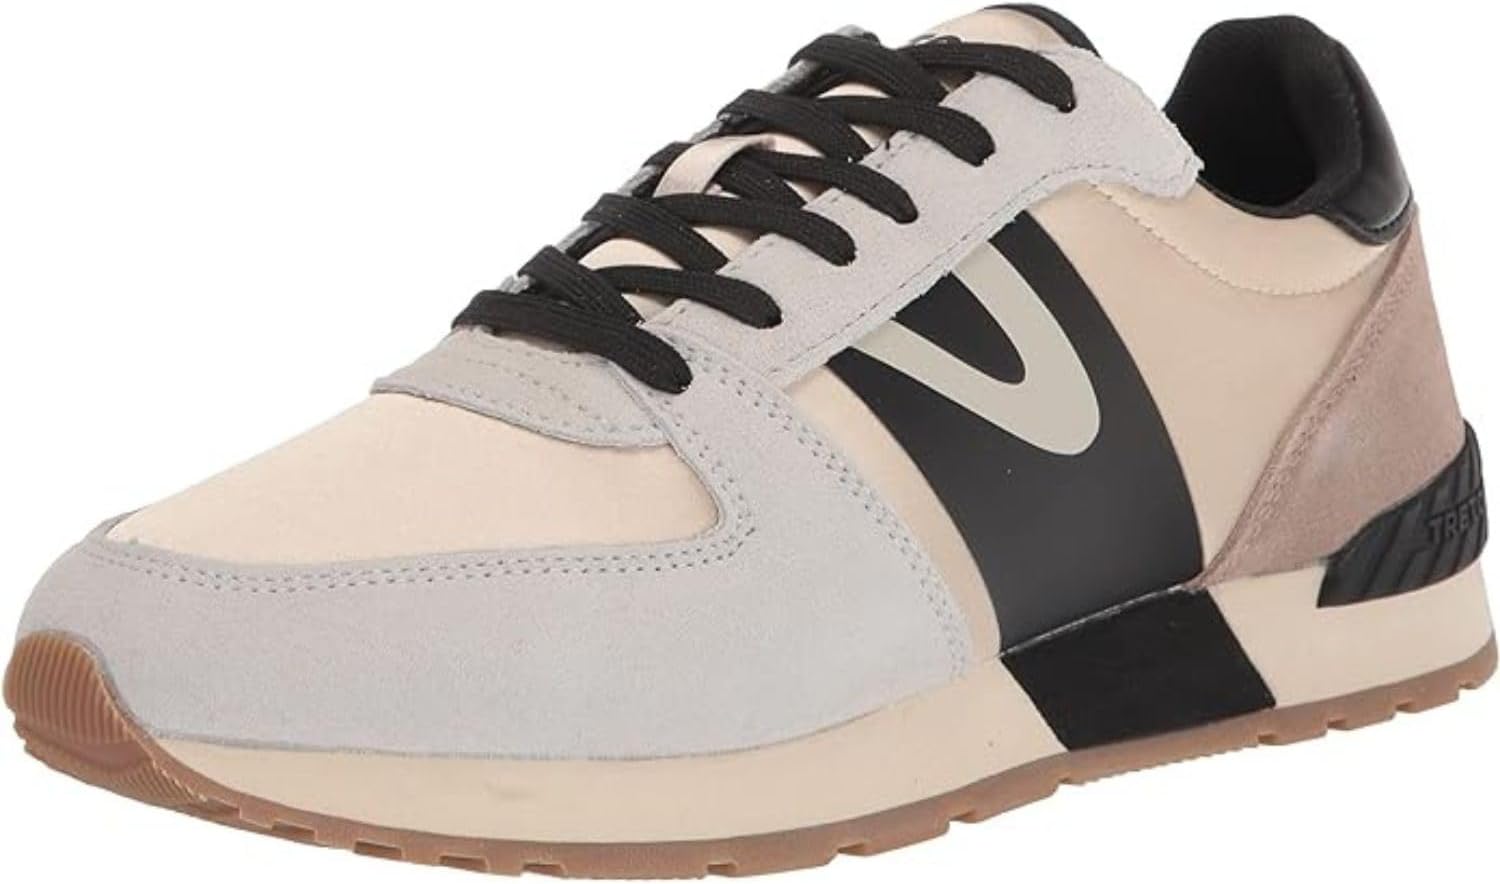 I ordered this sneaker in my regular size 8 and it fits normal.  I love the combination of neutrals and black, that makes them more versatile.  The show is very comfortable and the price was great!